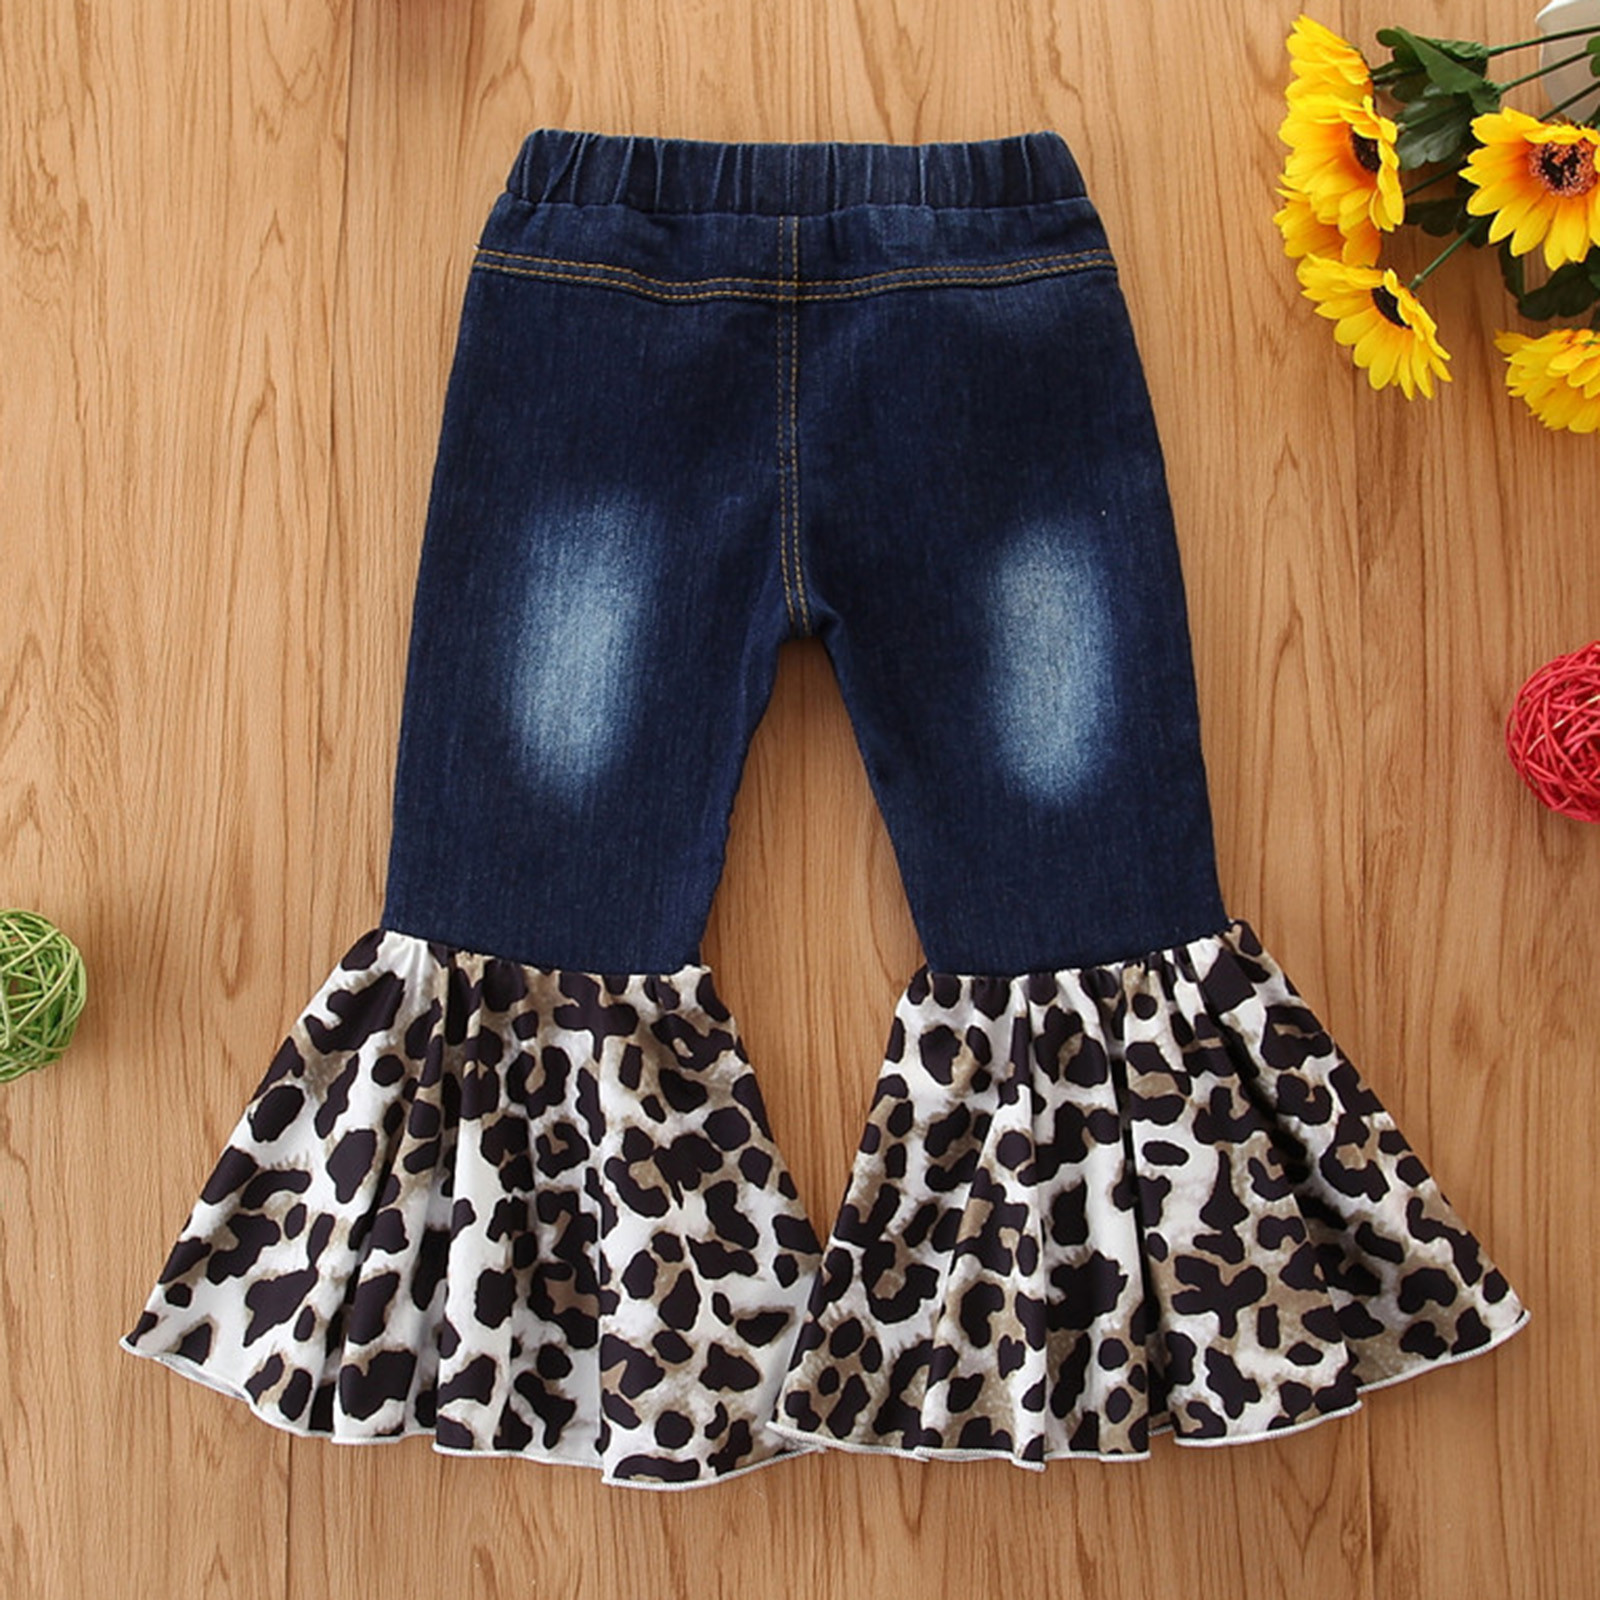 Baby Children Denim Kids Pants Toddler Jeans Tassel Trousers Clothes Girls Pants Girls Pants Girls Sweatpants Baby Girl Pants 9-12 Months Girls Mustache Leggings Girl Clothes Size 14-16 Loose - image 4 of 8